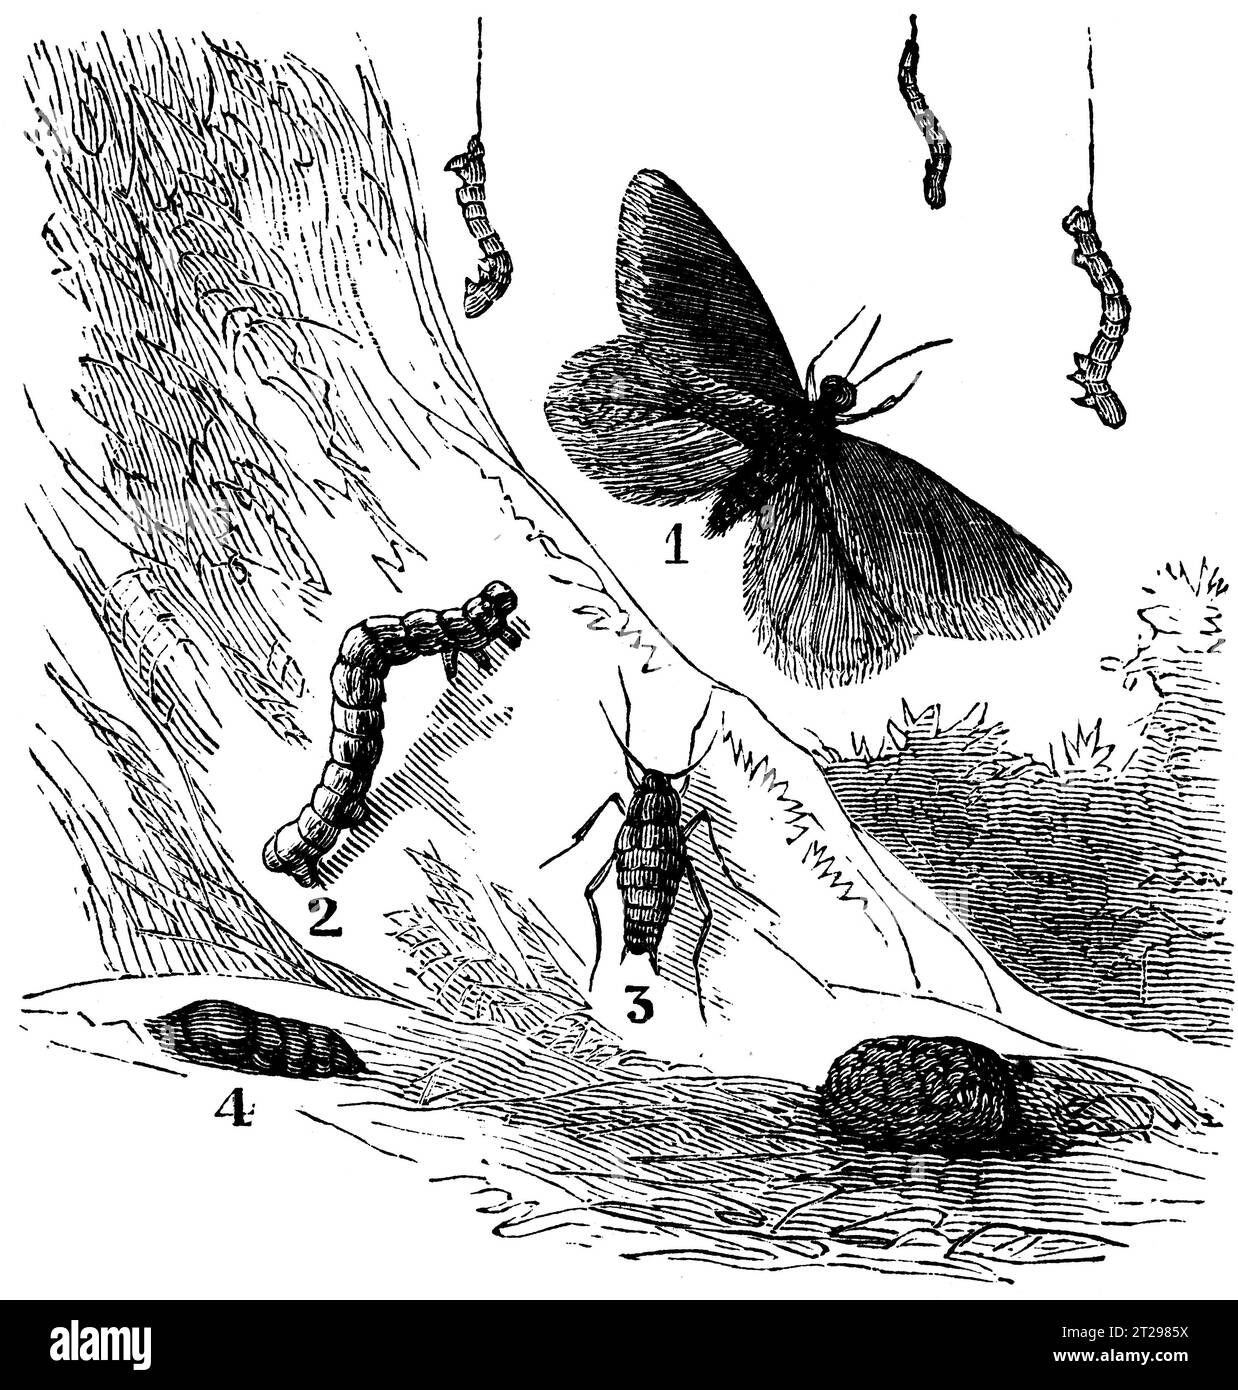 digitally restored illustration from 'The Condensed American Encyclopedia', published in the 19th century. Stock Photo